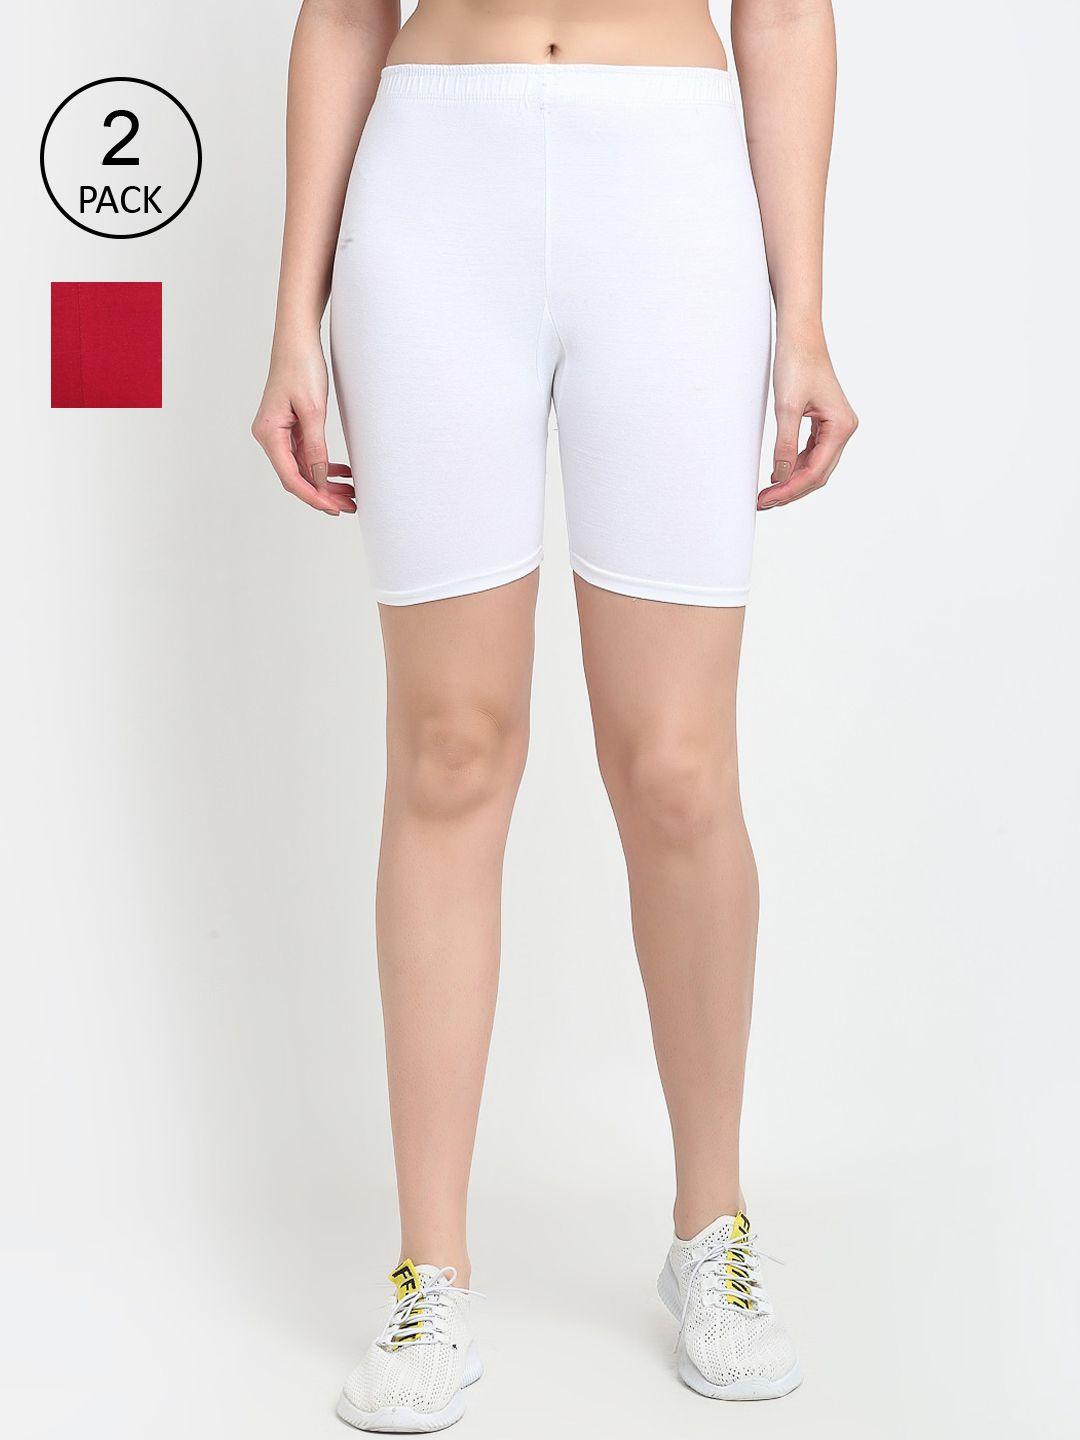 gracit-women-pack-of-2-white-&-maroon-cycling-sports-shorts